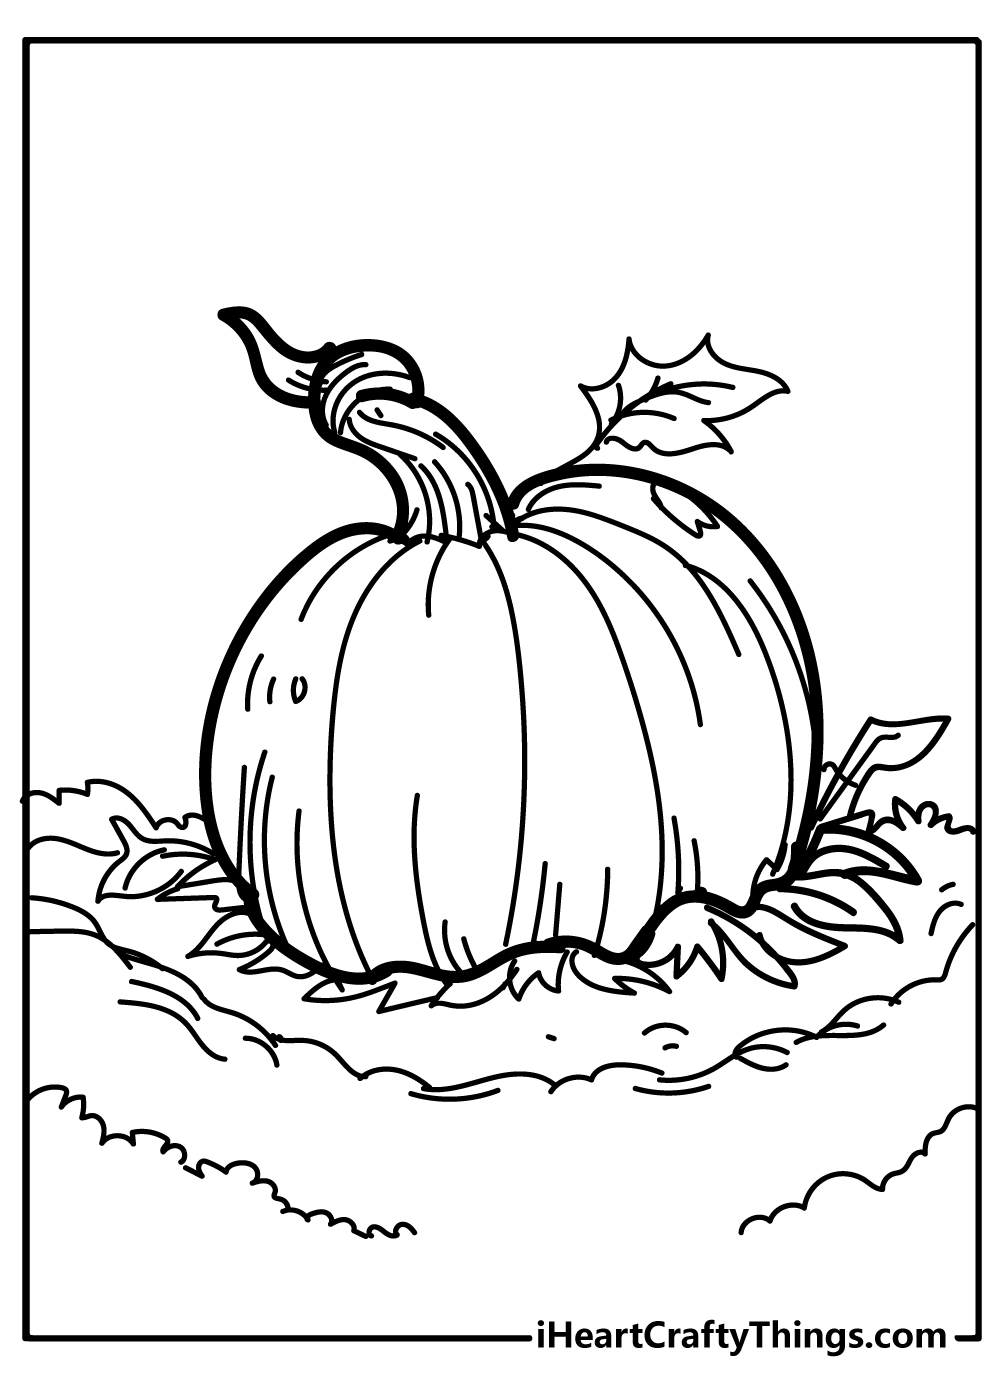 Pumpkin Coloring book for adults free download